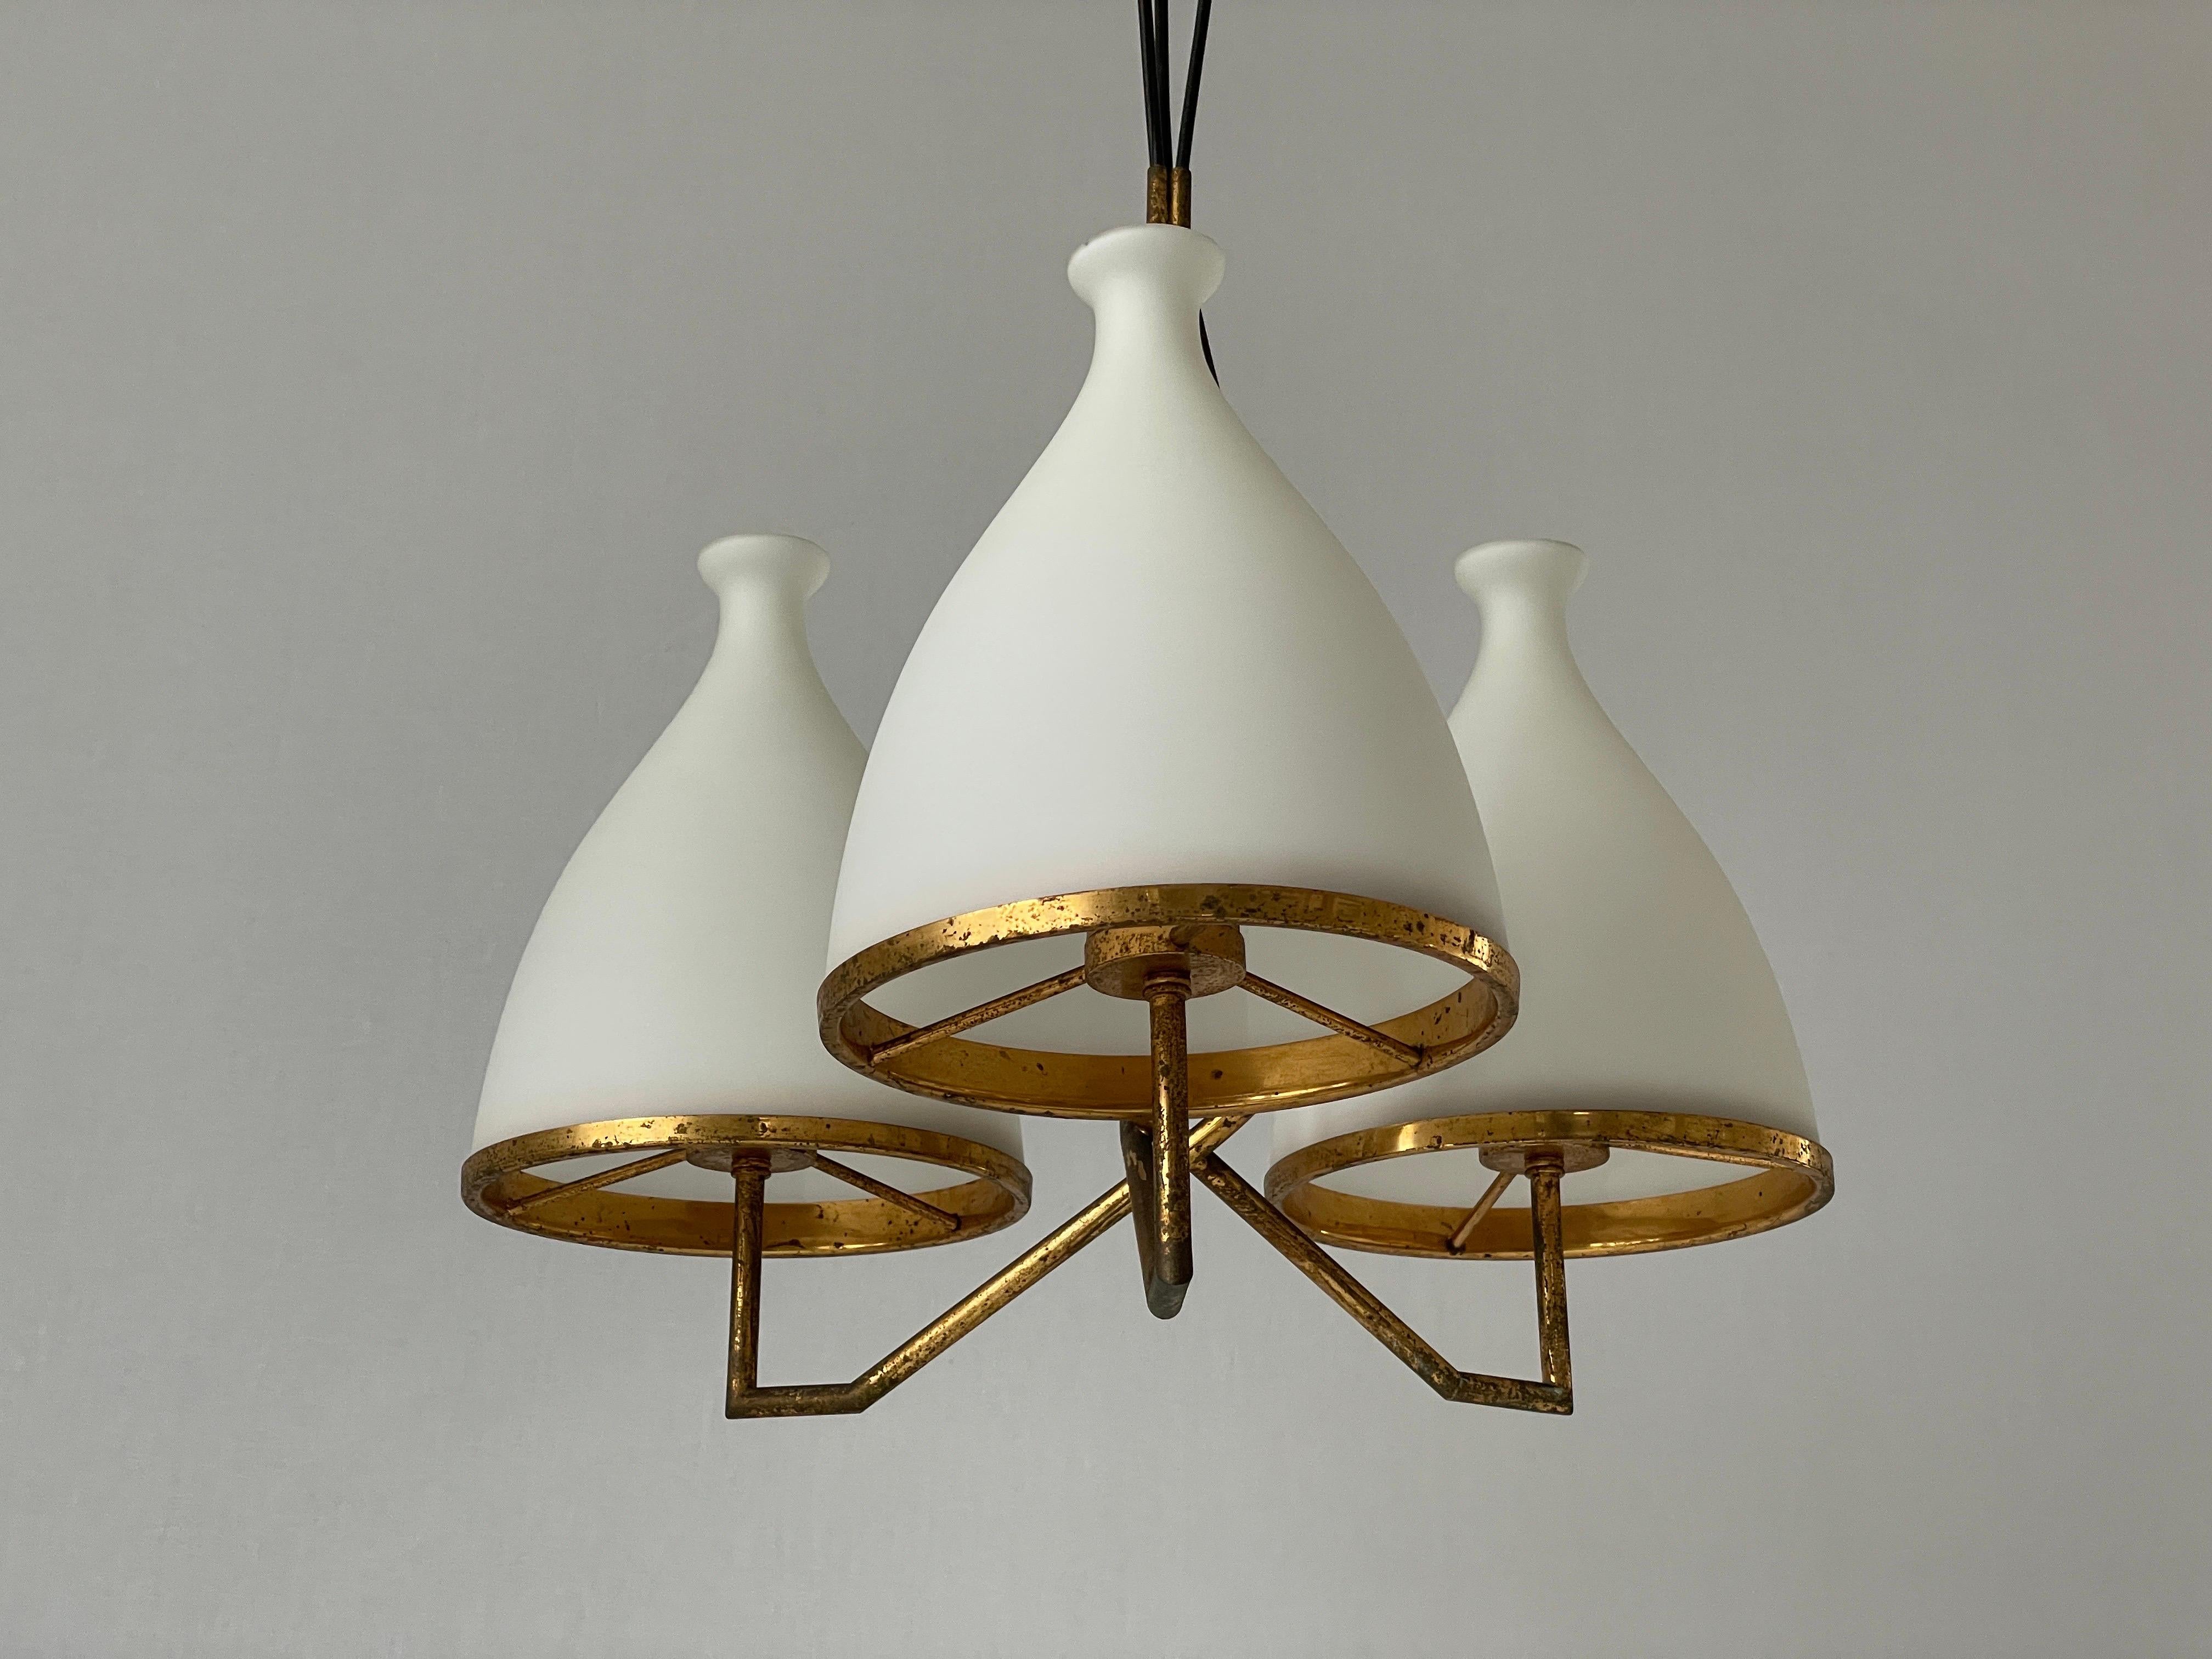 Mid-centuy Modern Chandelier by Bruno Chiarini for Stilnovo, Italy, 1950s

Lampshade is in very good vintage condition.

This lamp works with 3x E27 light bulb 
Wired and suitable to use with 220V and 110V for all countries.

Measurements:
Height: